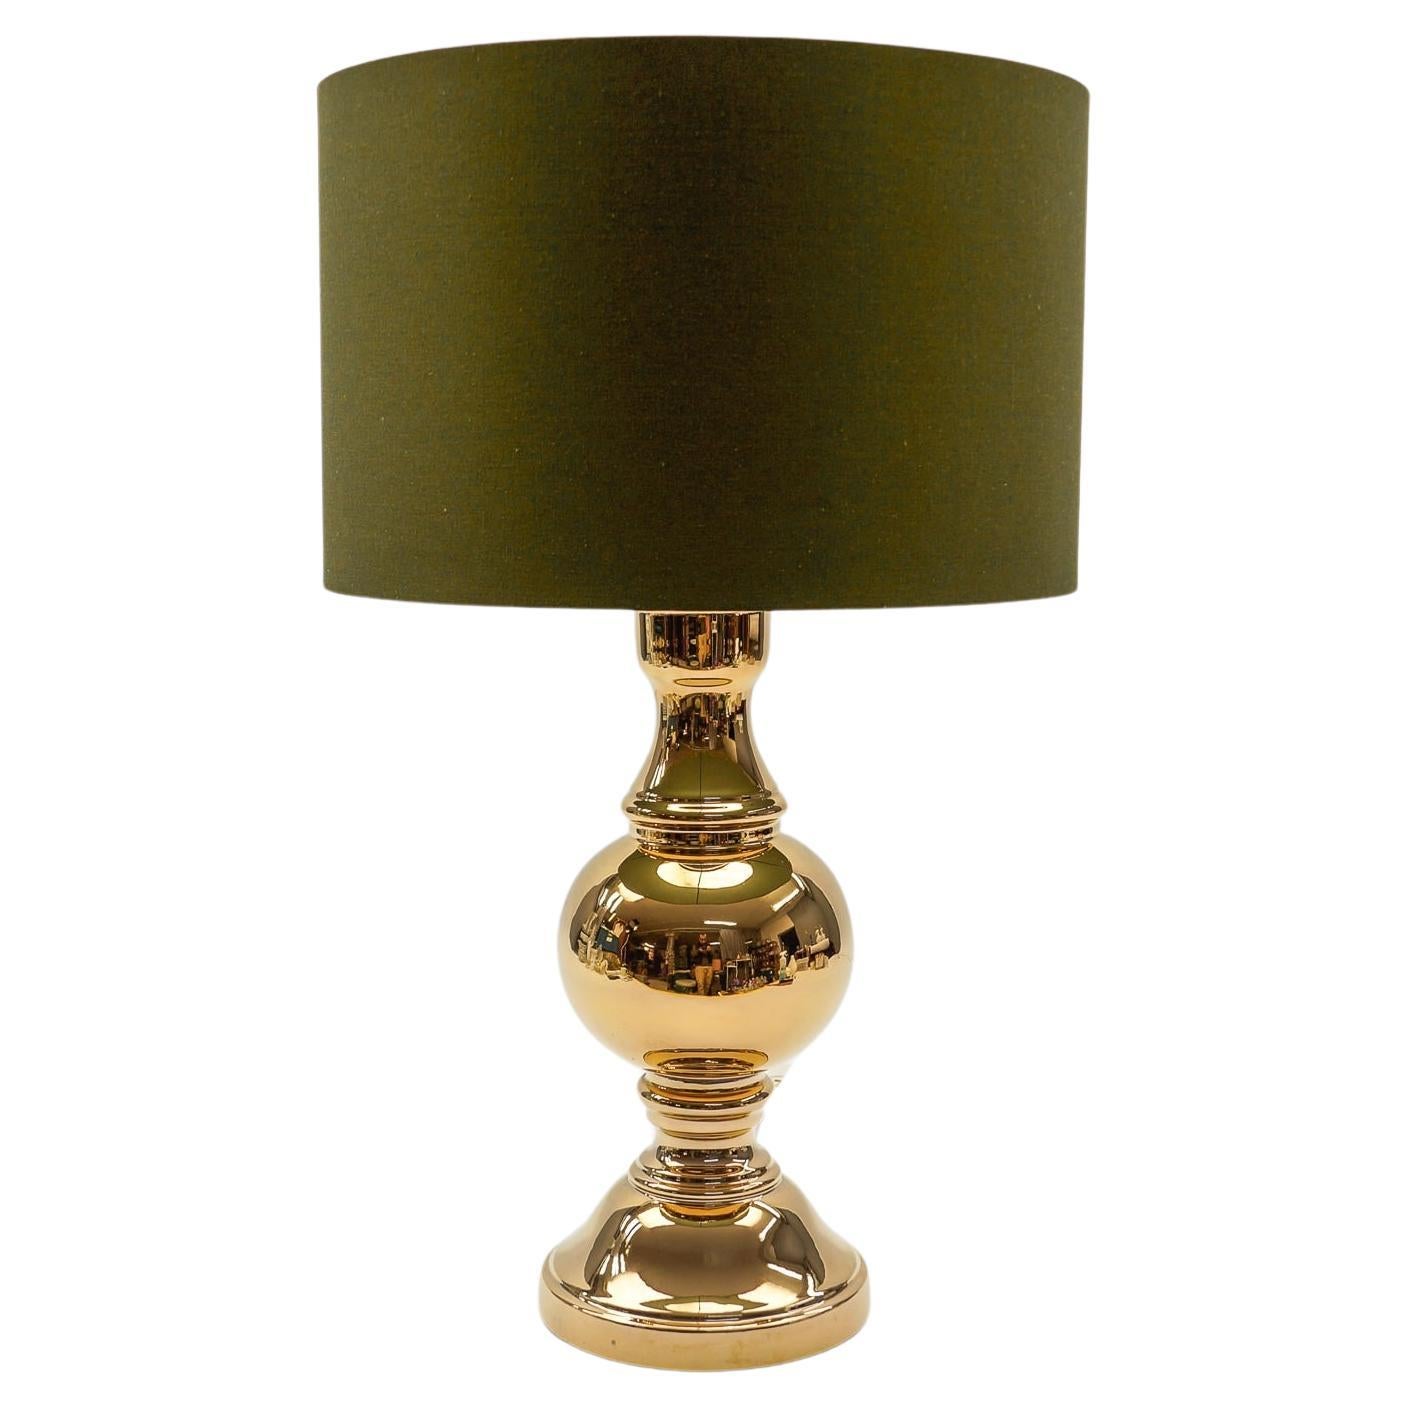 Very Rare Large Golden Ceramic Table Lamp Base, Italy 1960s For Sale